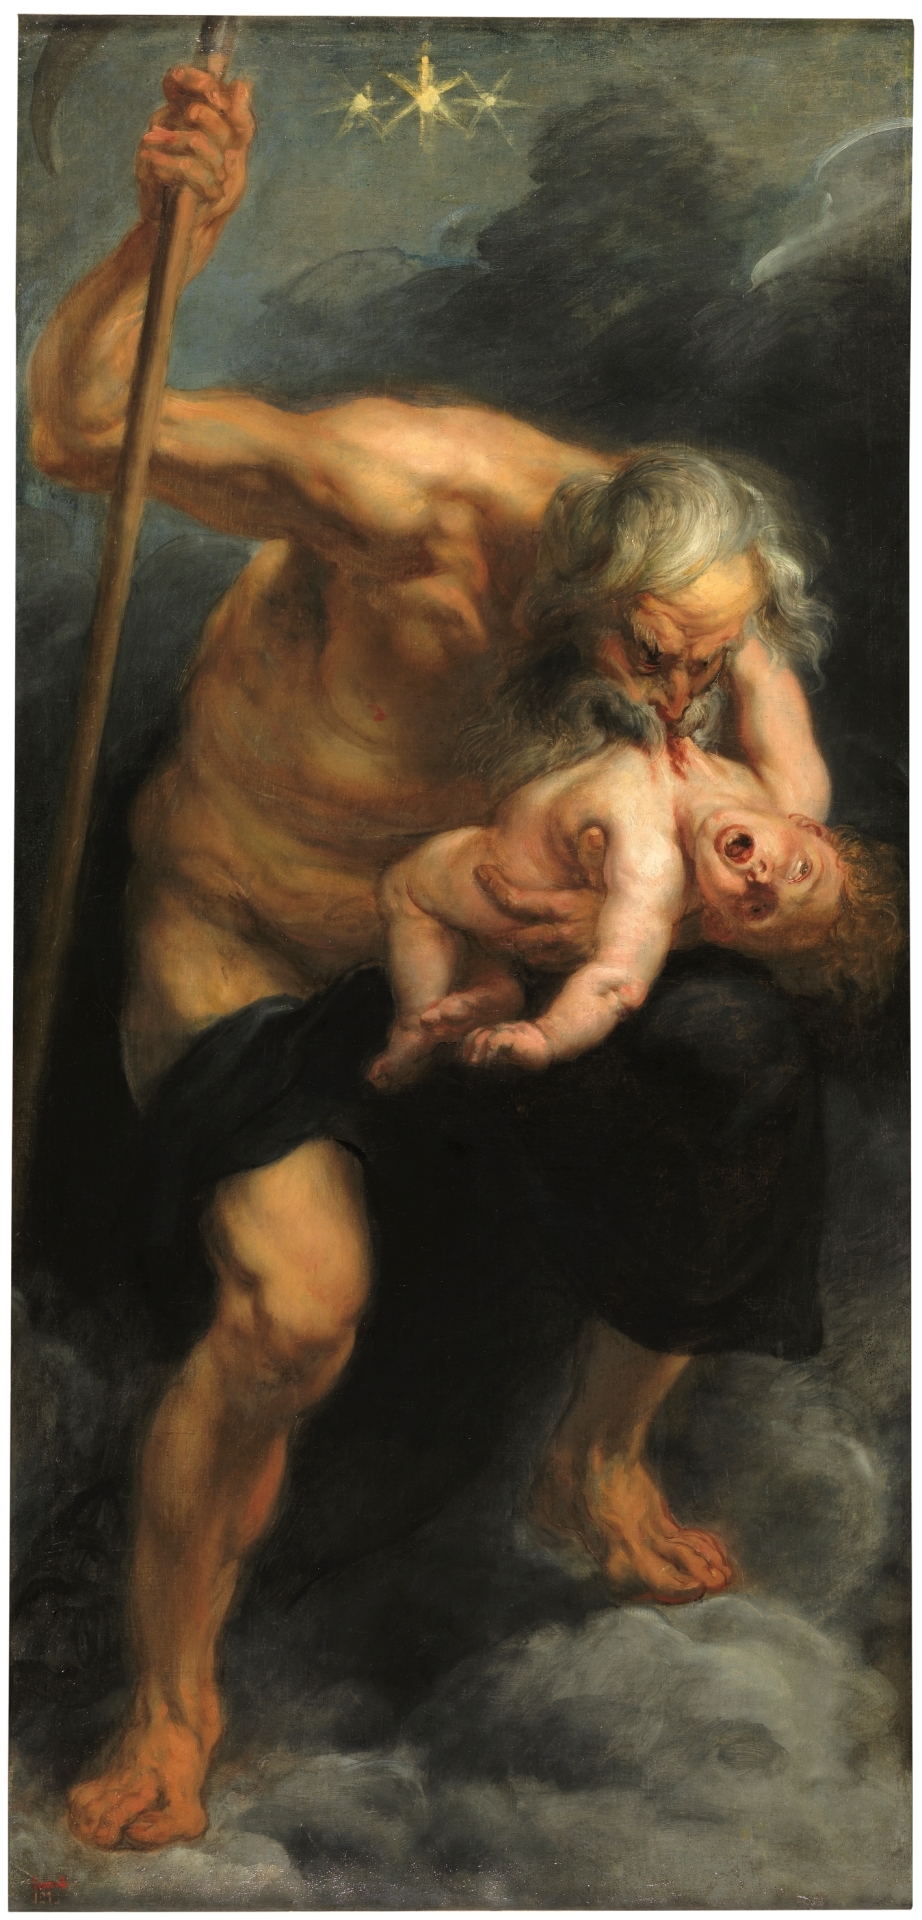 01 saturn-devouring-his-son-1636-oil-on-canvas-peter-paul-rubens